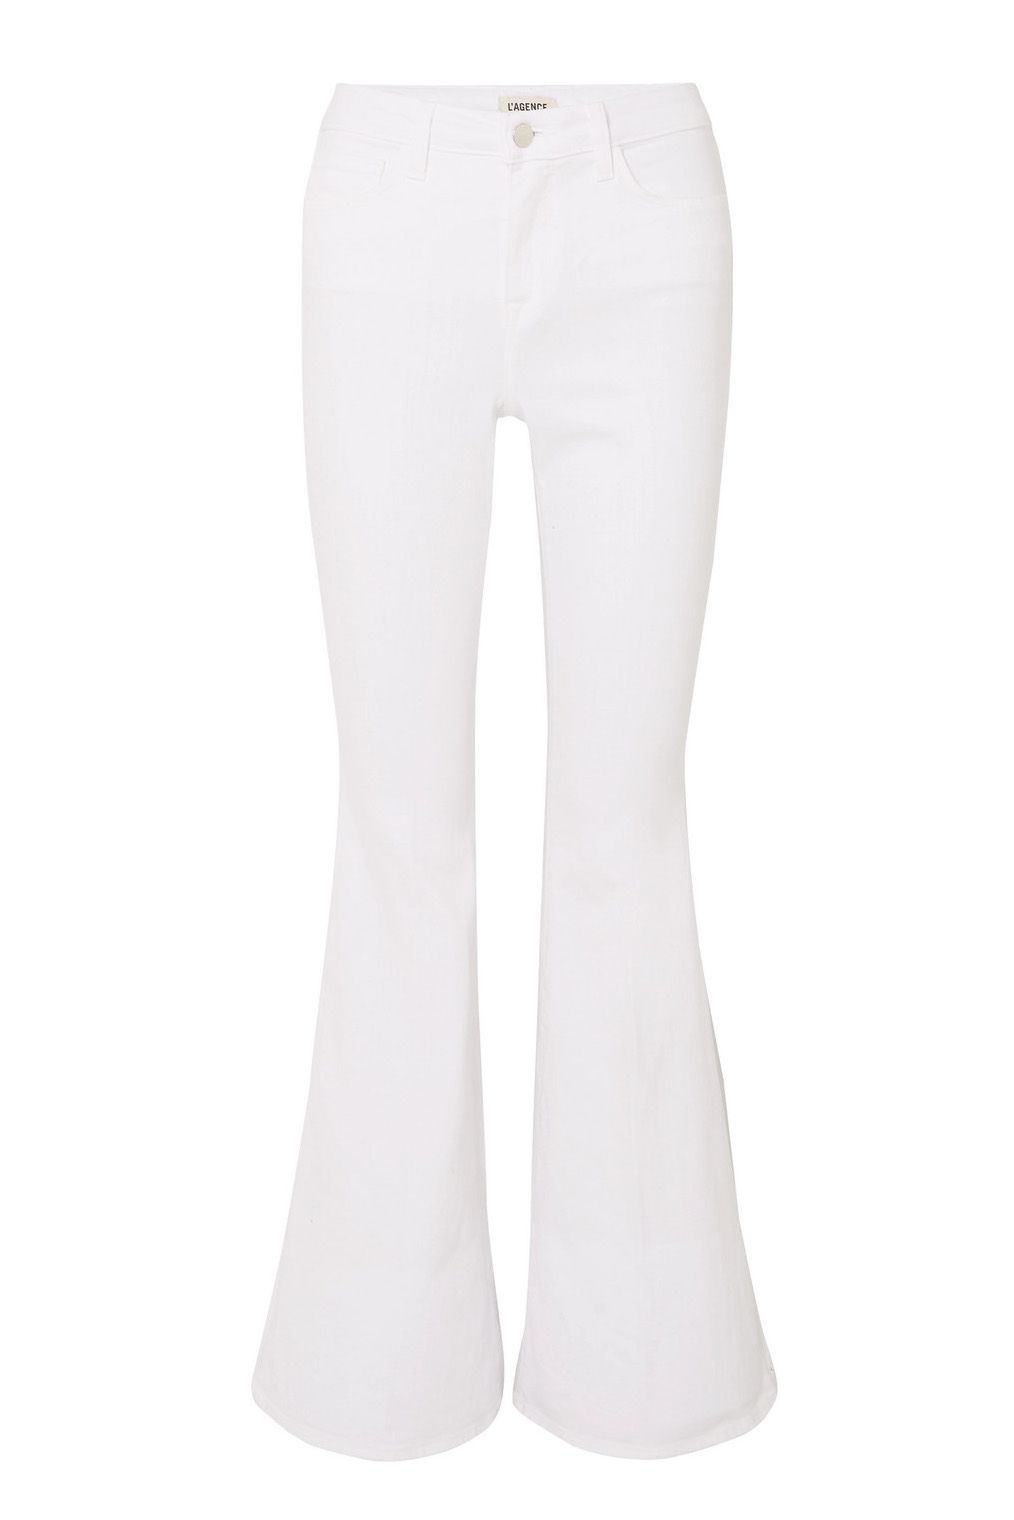 best white cropped jeans